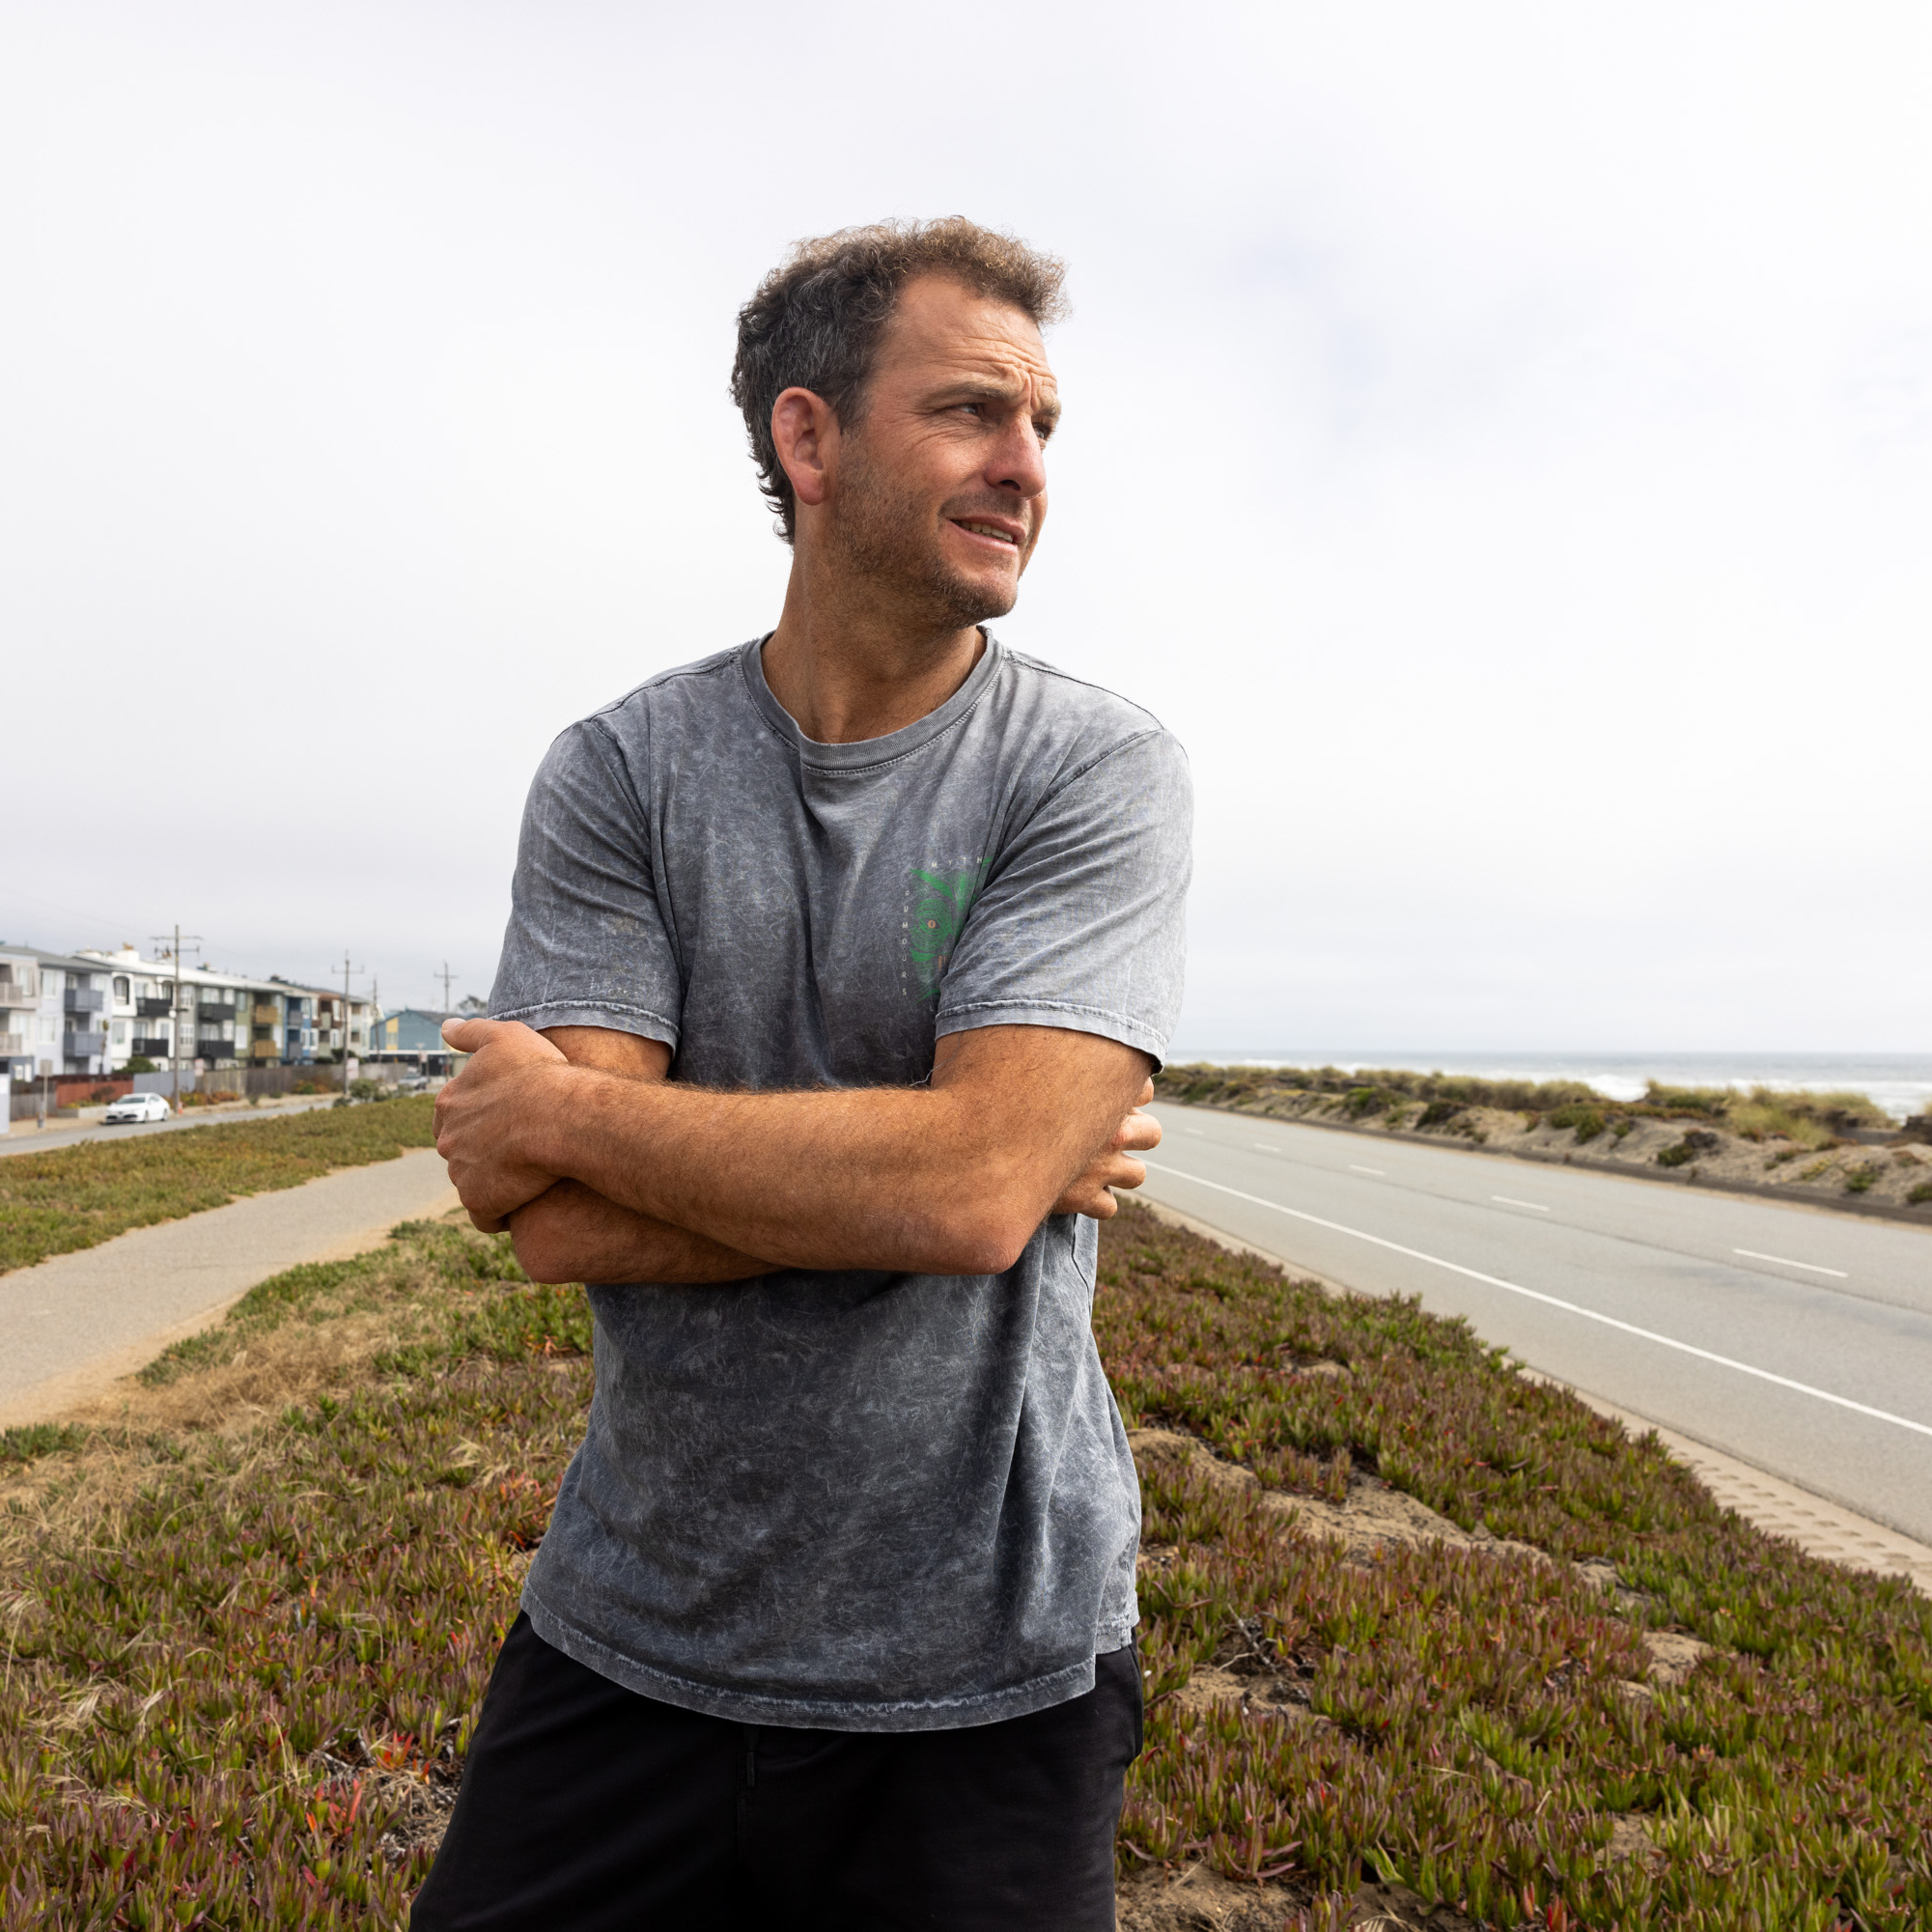 A man in a grey shirt stands with arms crossed, looking to his right. He is on a path near a road by the coast, with buildings and parked cars visible in the background.